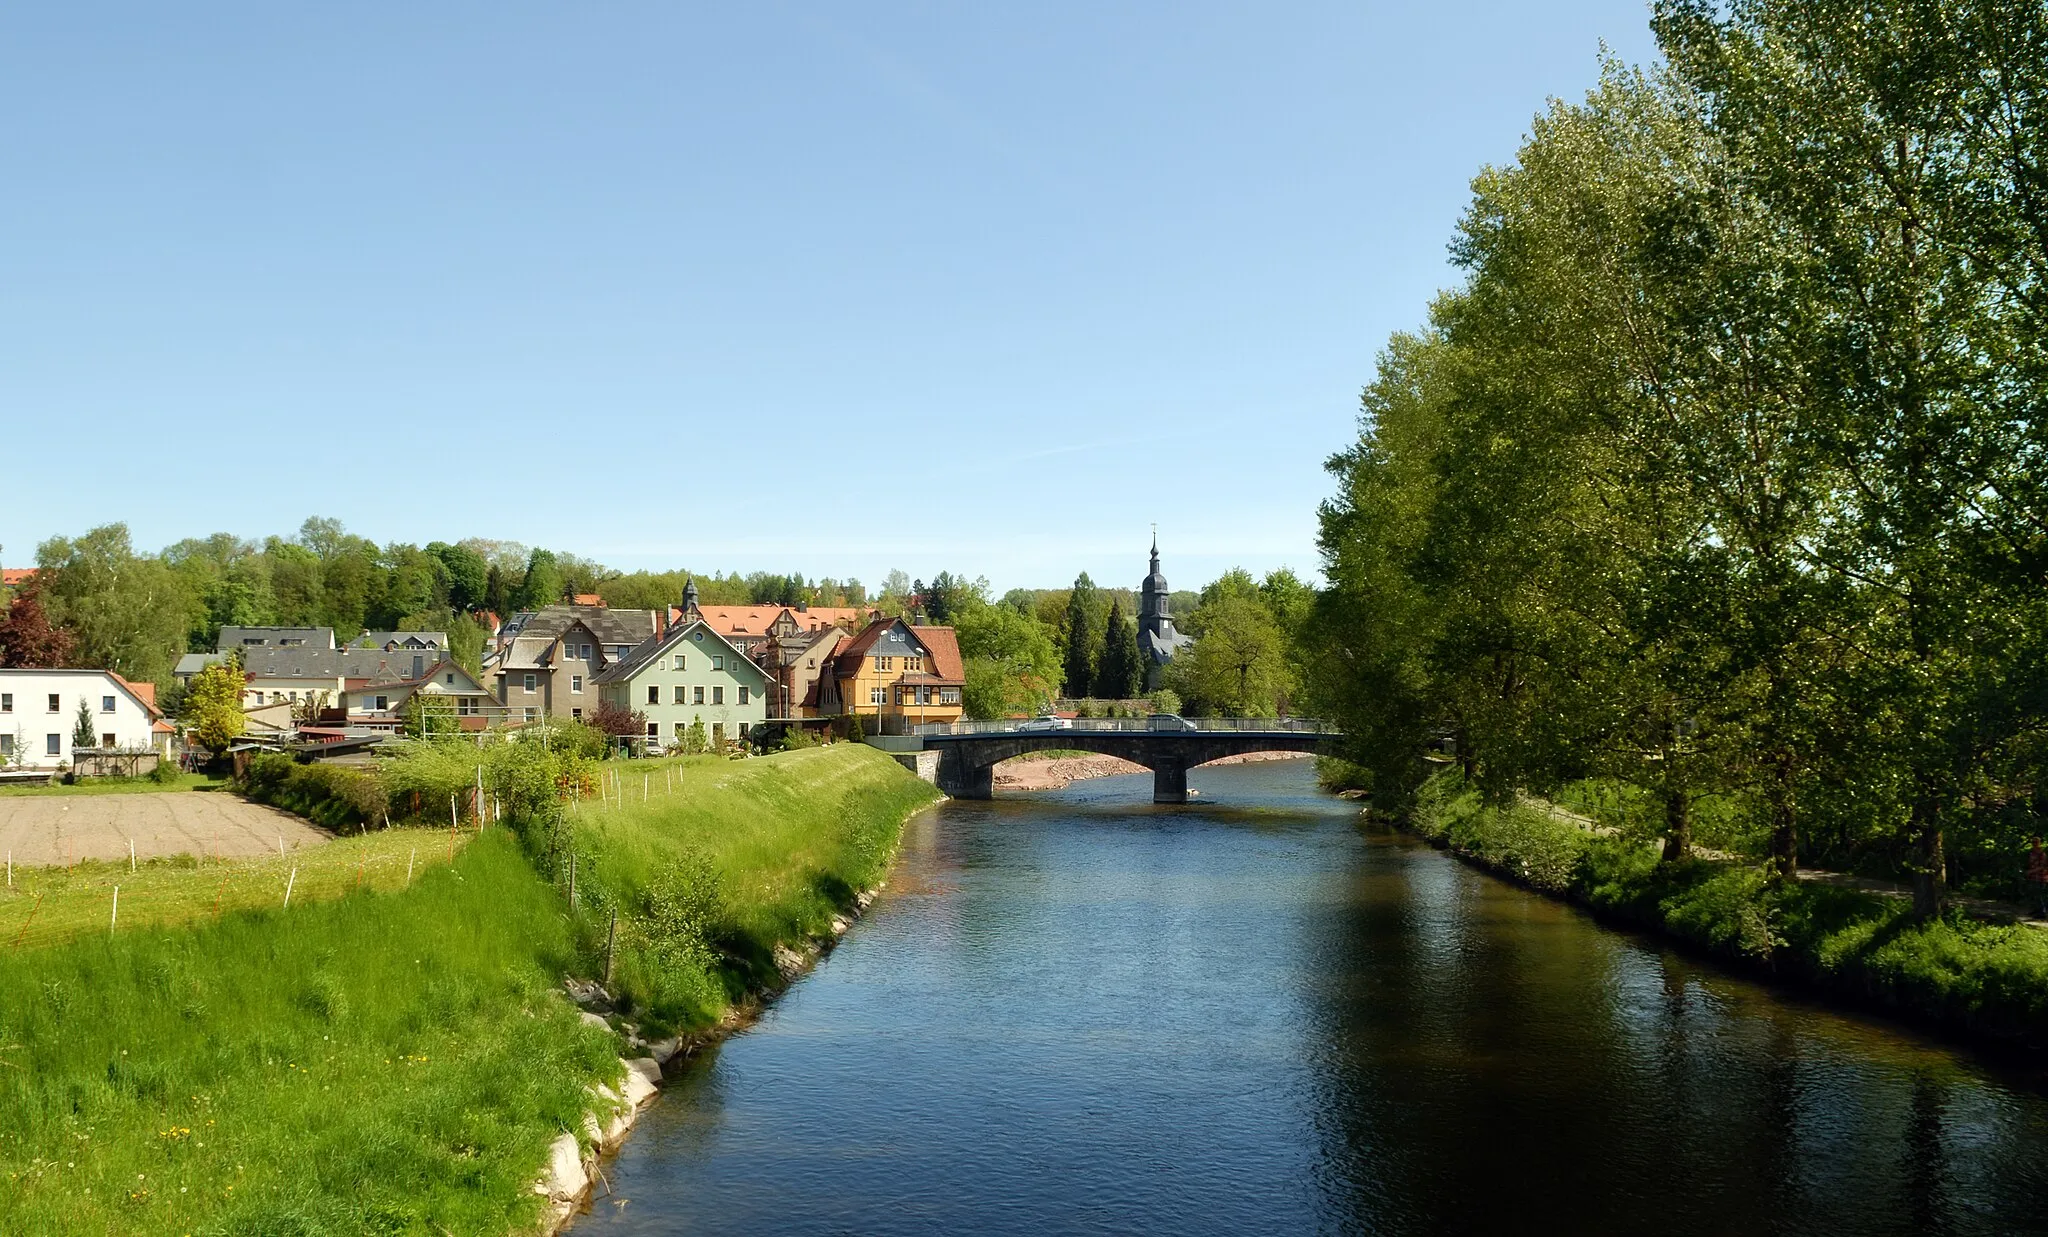 Photo showing: This image shows the river Flöha in the town Flöha, Germany. In the background there is a bridge with the Augustusburg street and the George church.